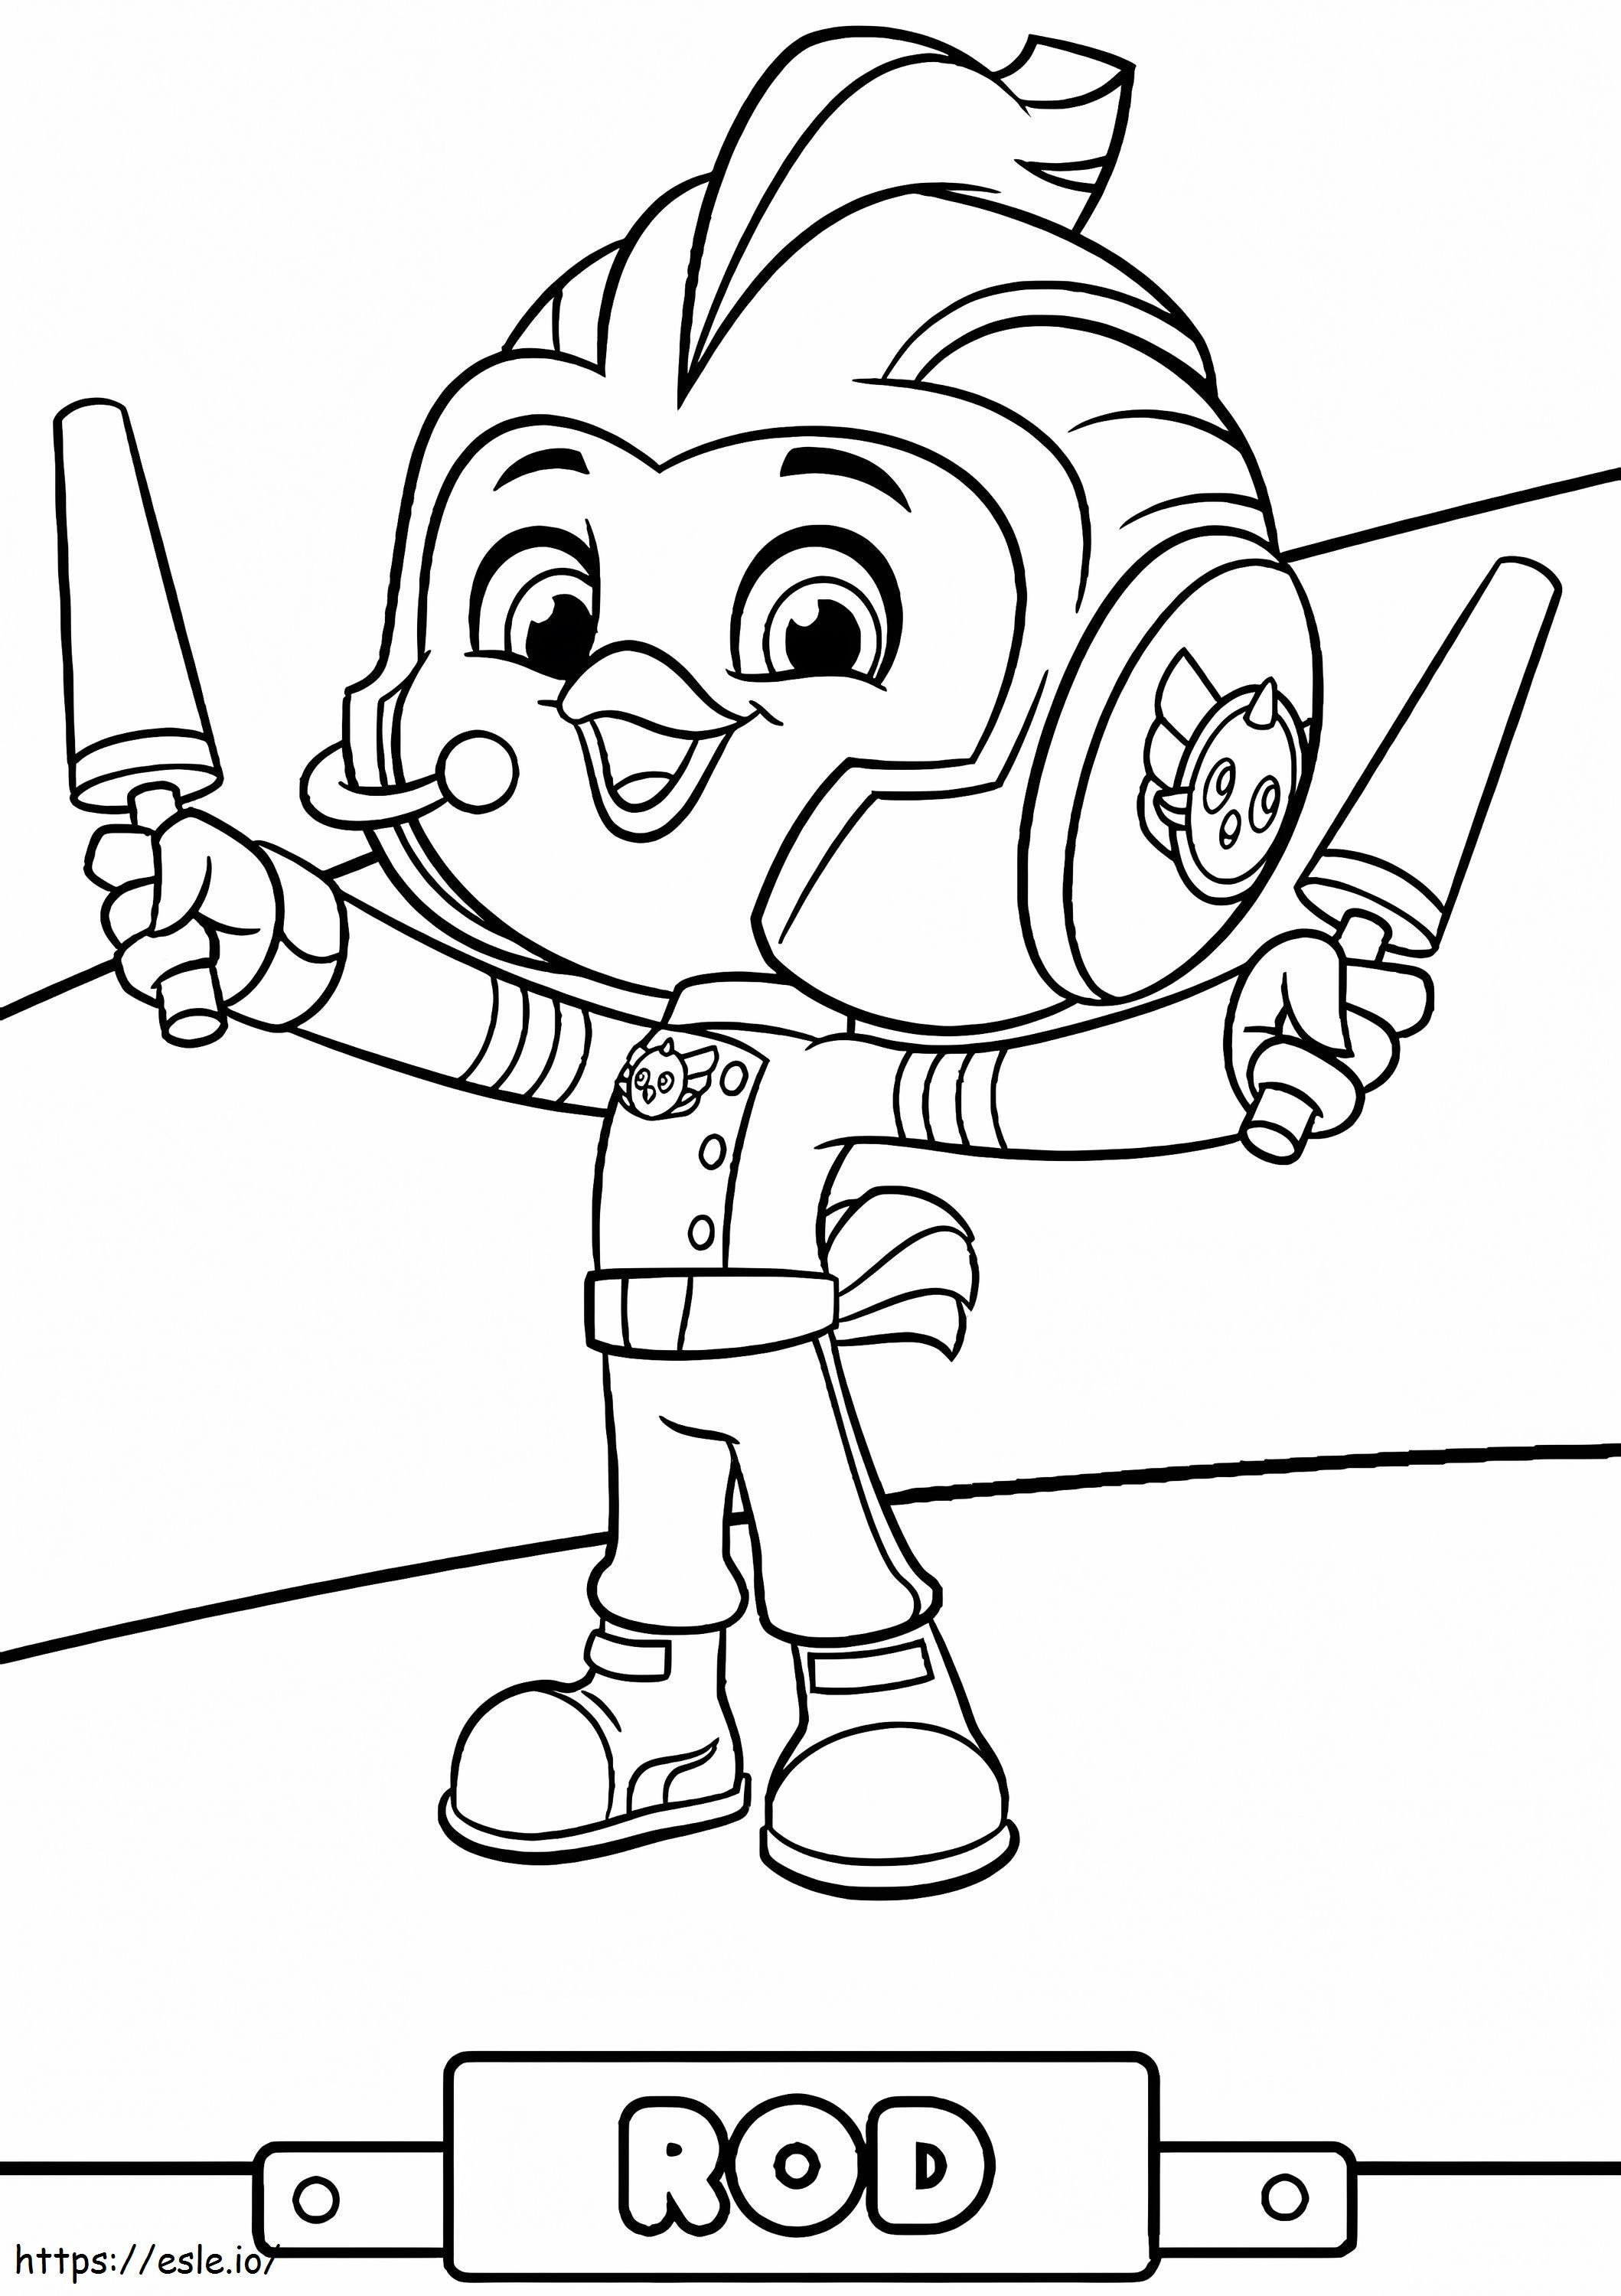 Rod Top Wing coloring page